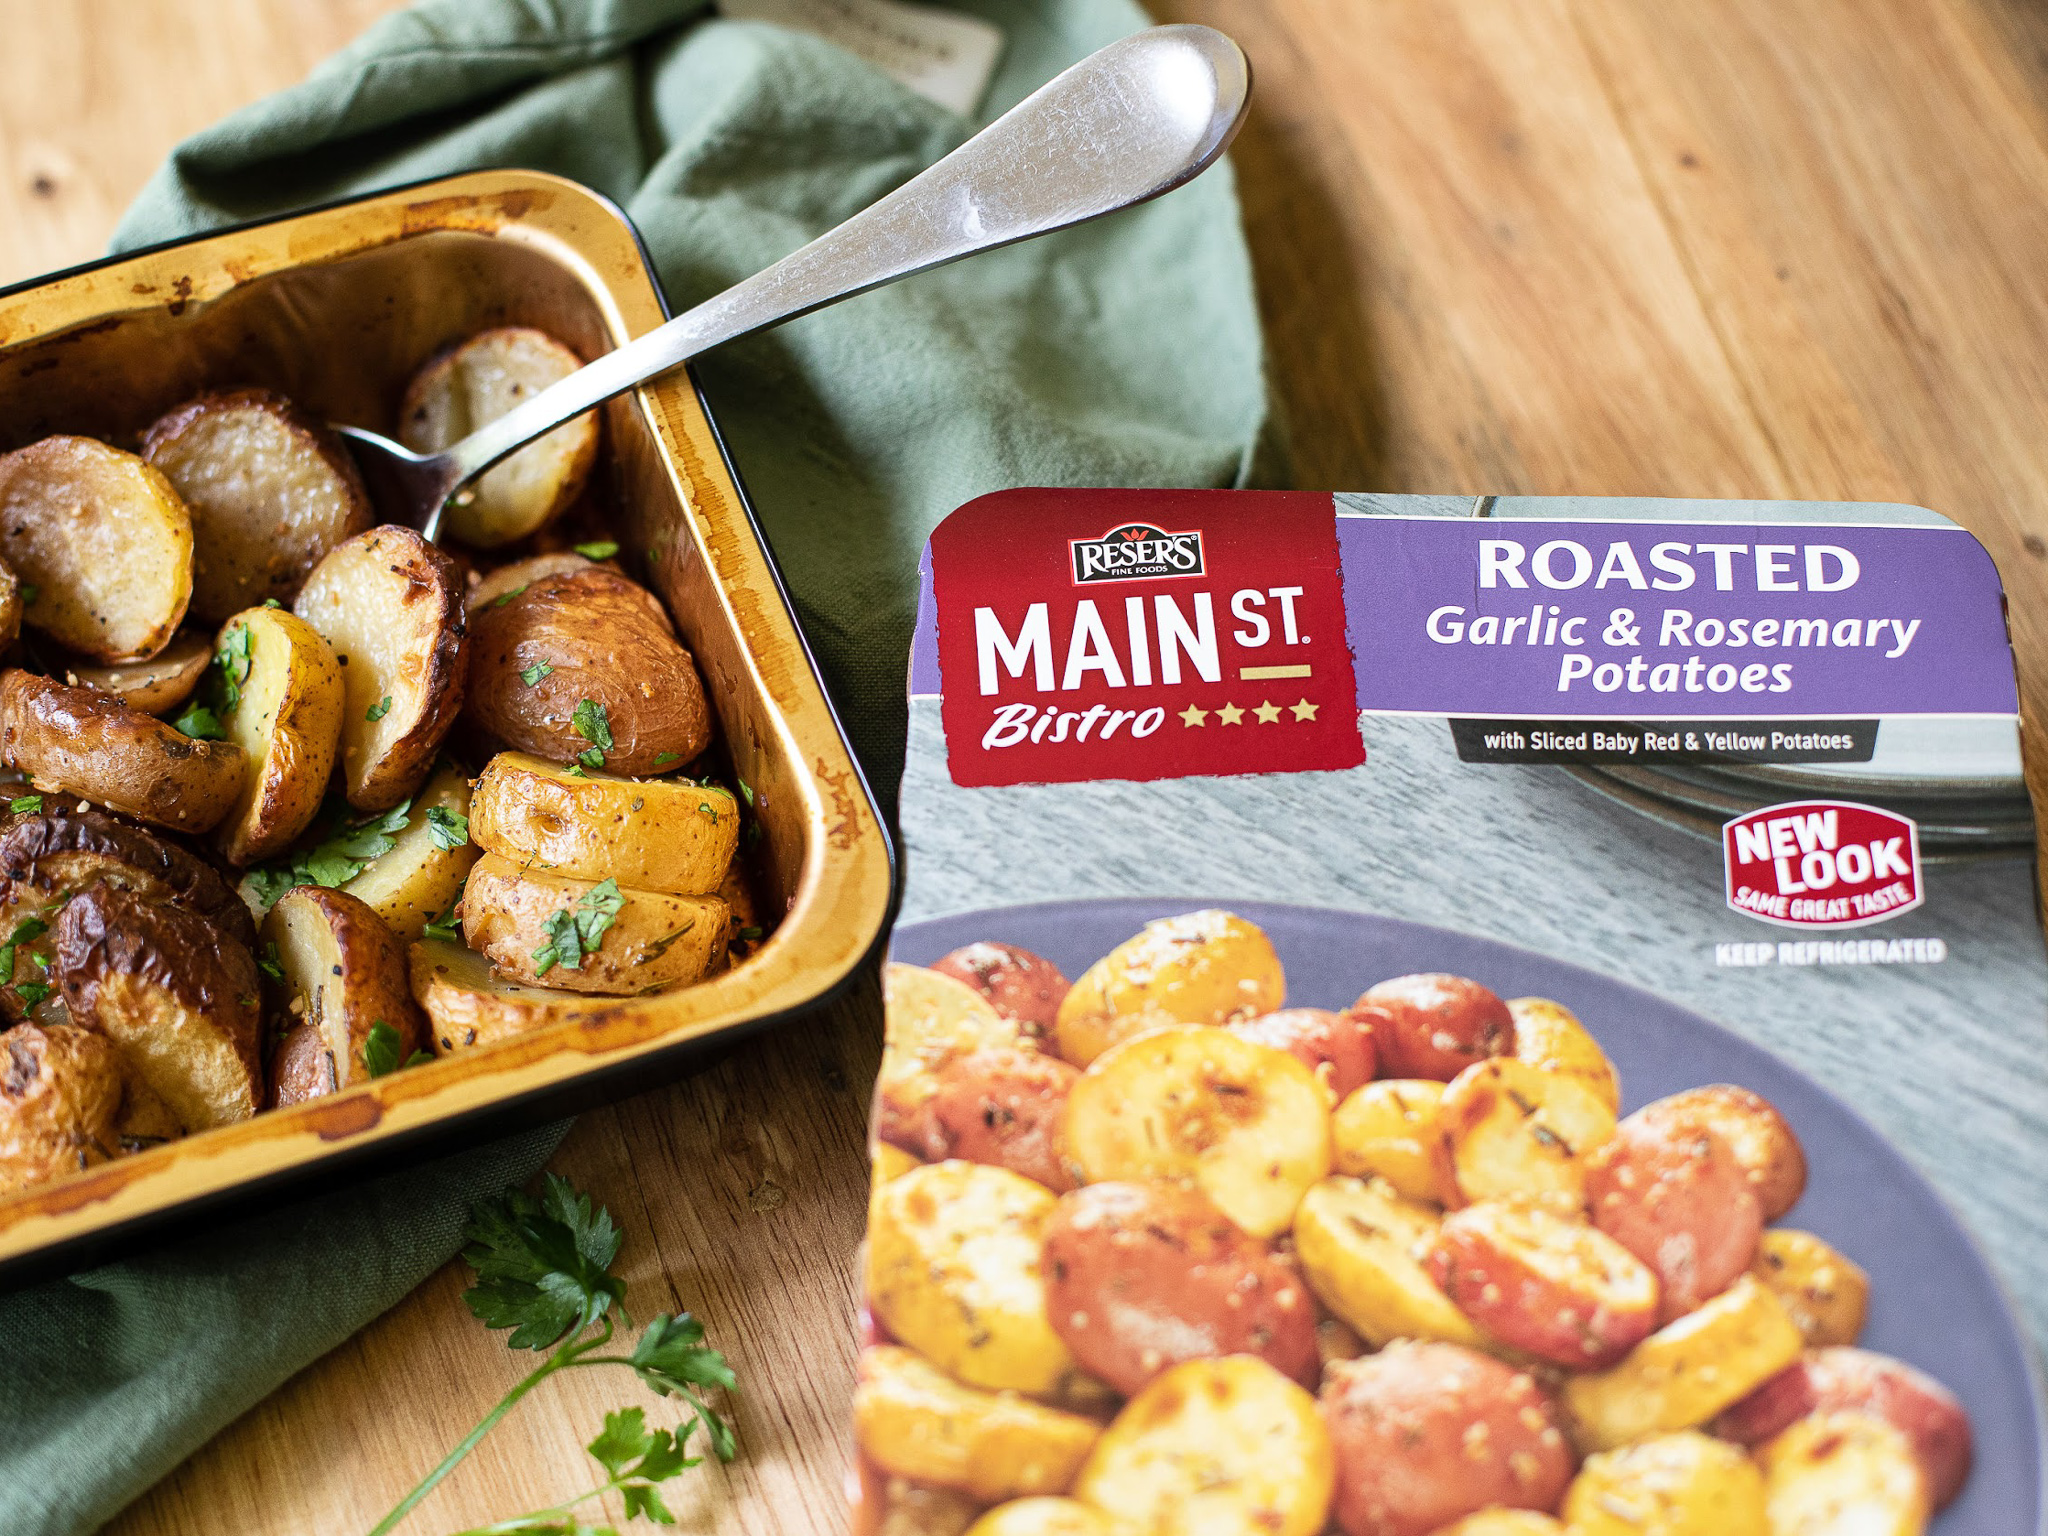 Reser’s Main St. Bistro Baked Sides Just $3.50 At Publix